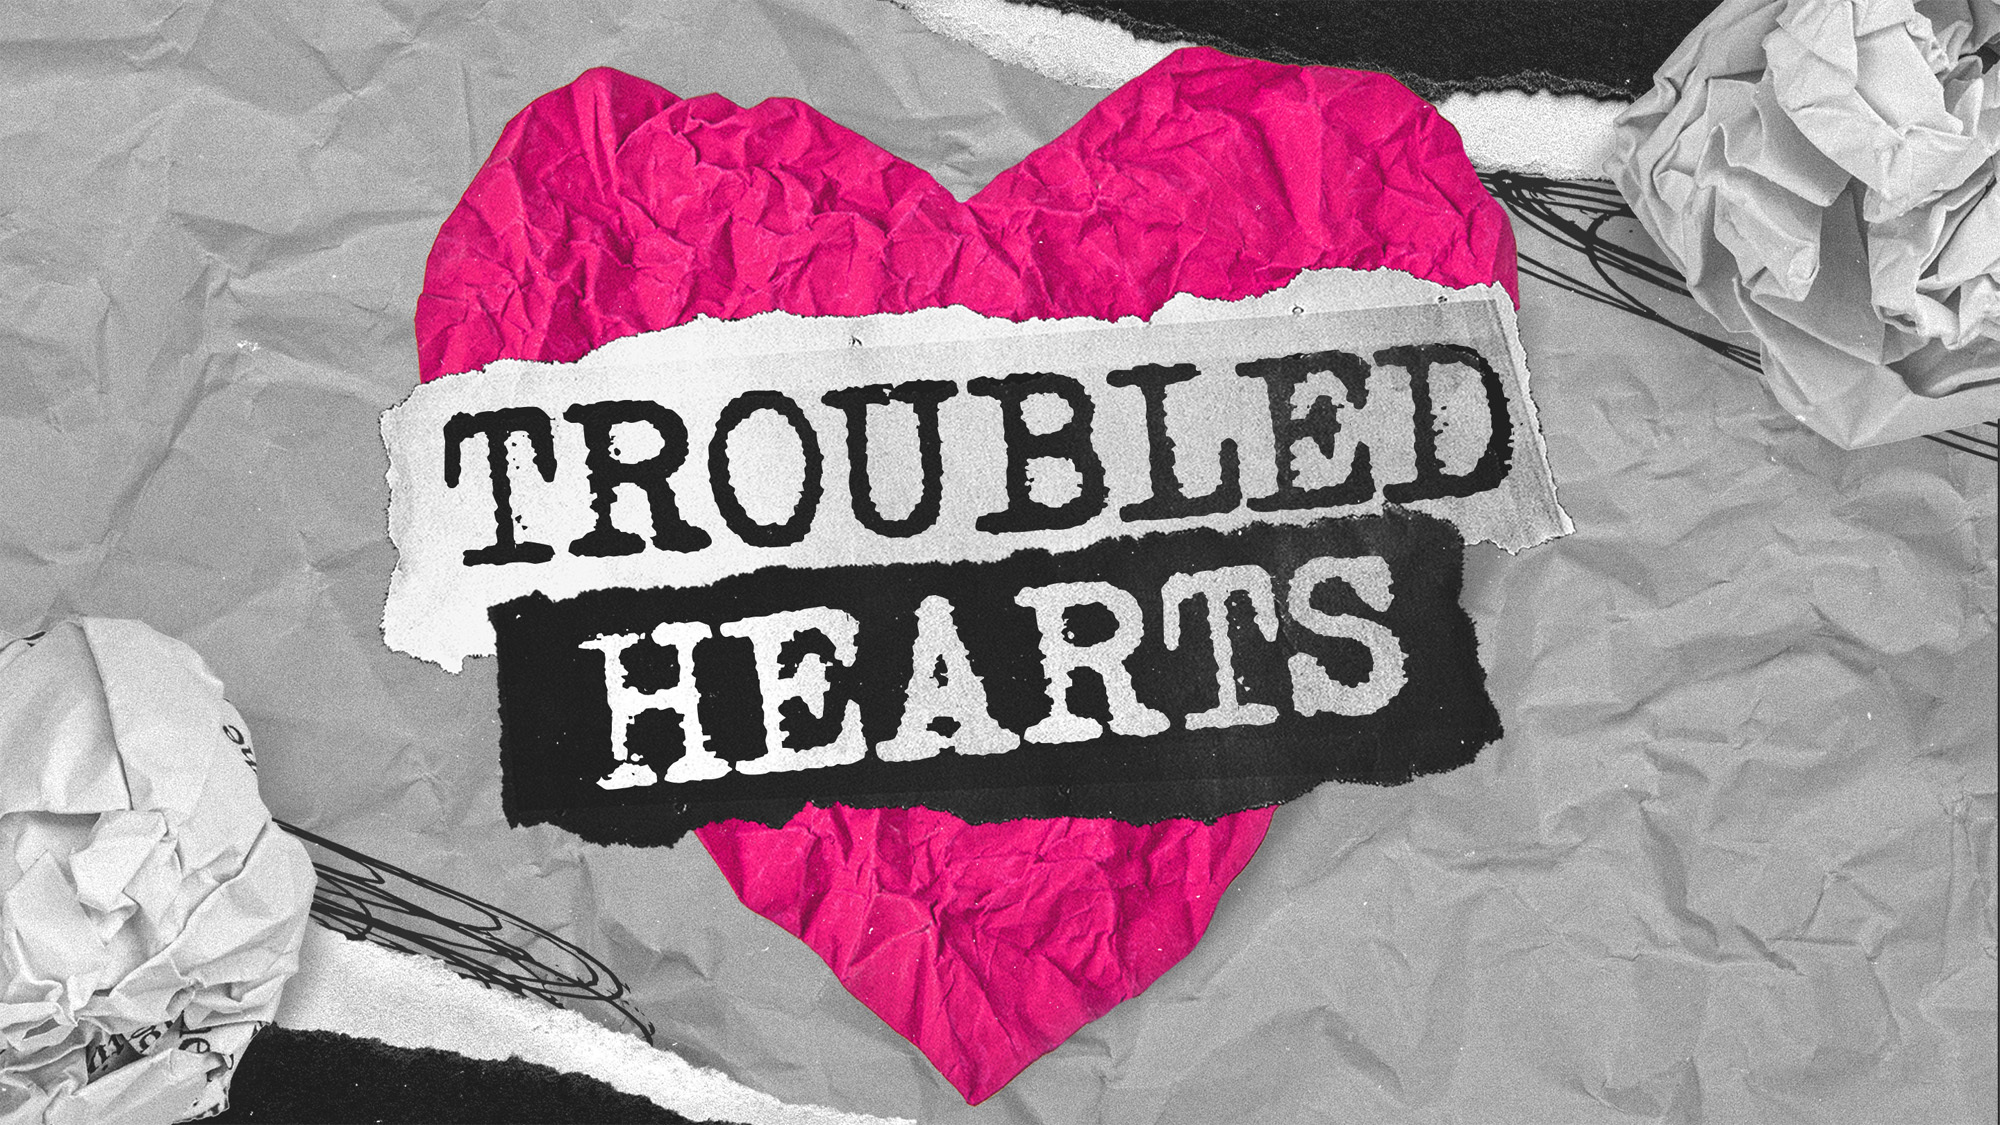 Troubled Hearts